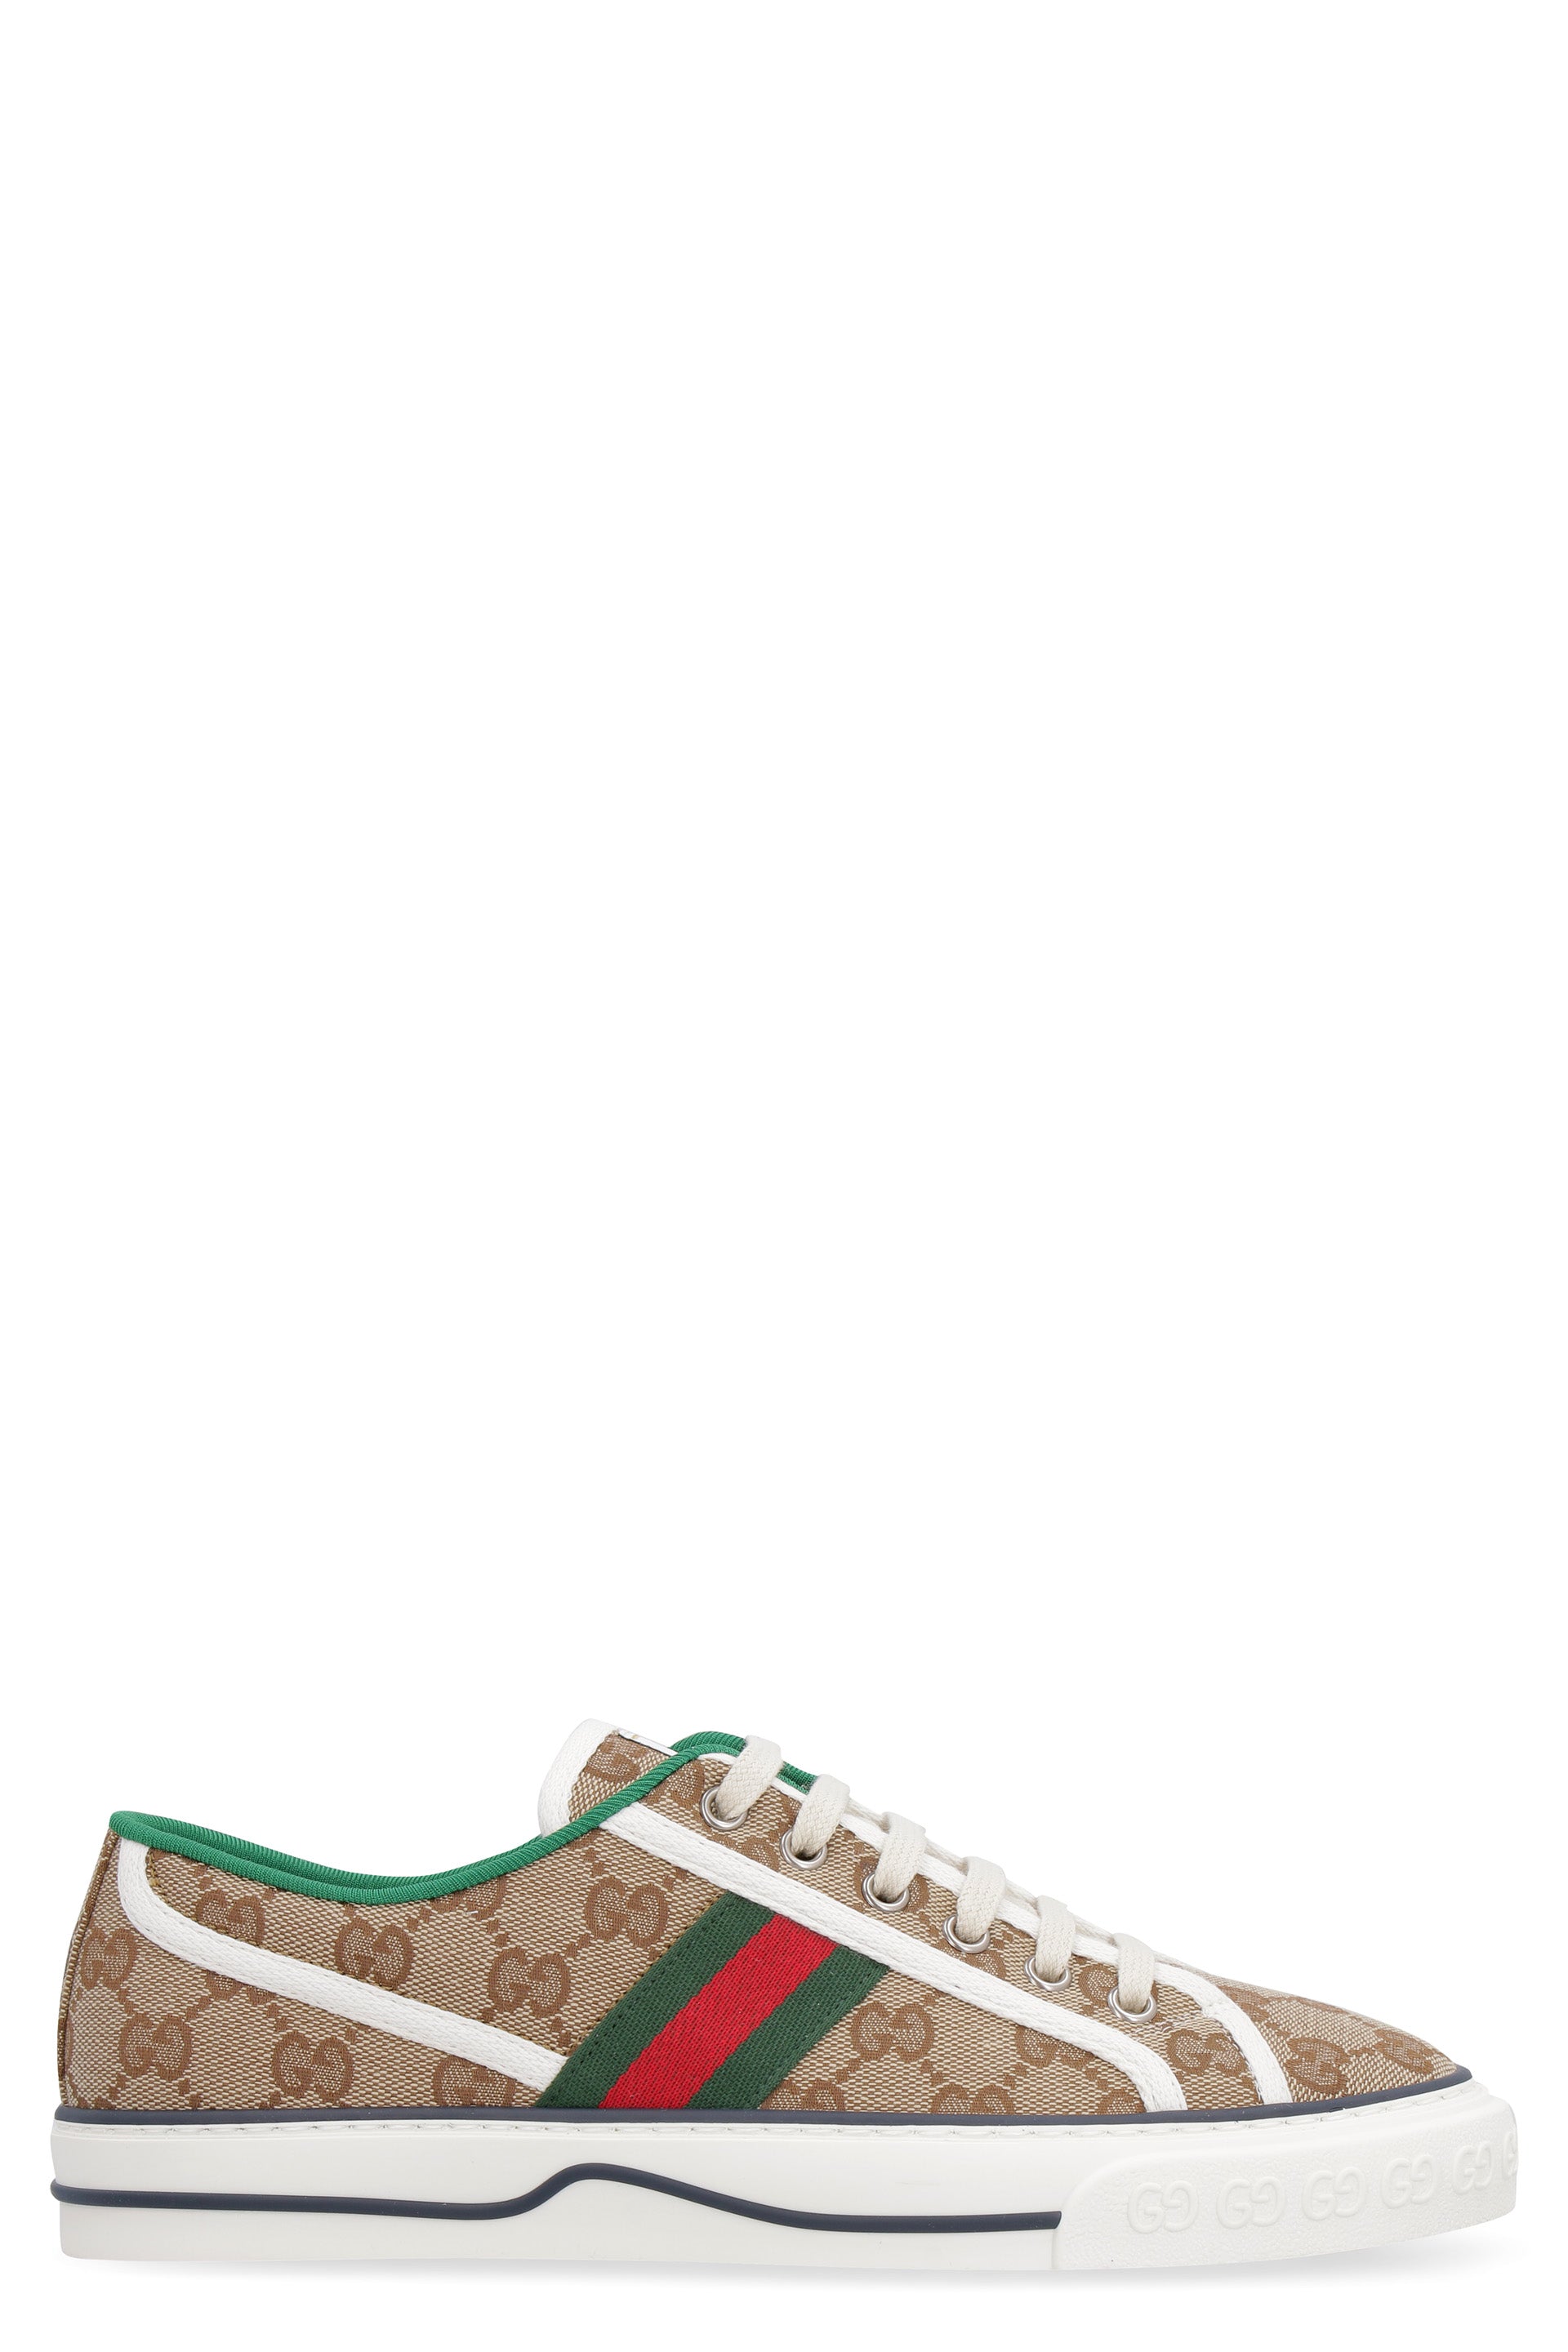 Gucci Beige Low-top Sneakers For Women With Iconic Gg Logo And Contrasting Trimmings In Tan